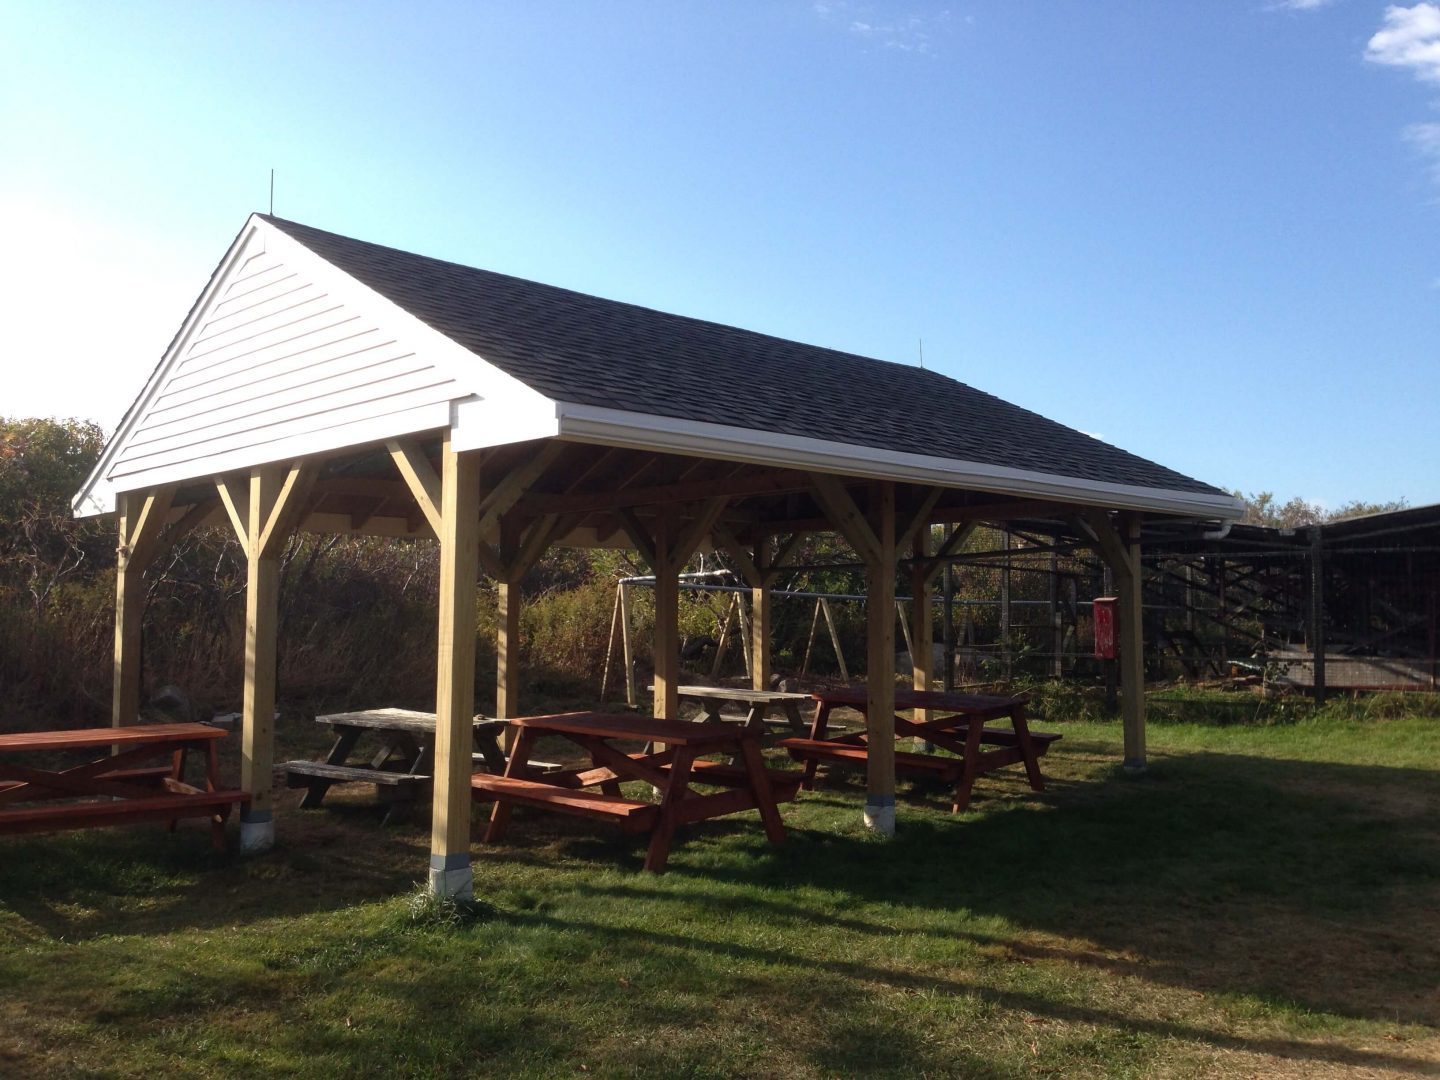 A large wooden structure with picnic tables underneath it.